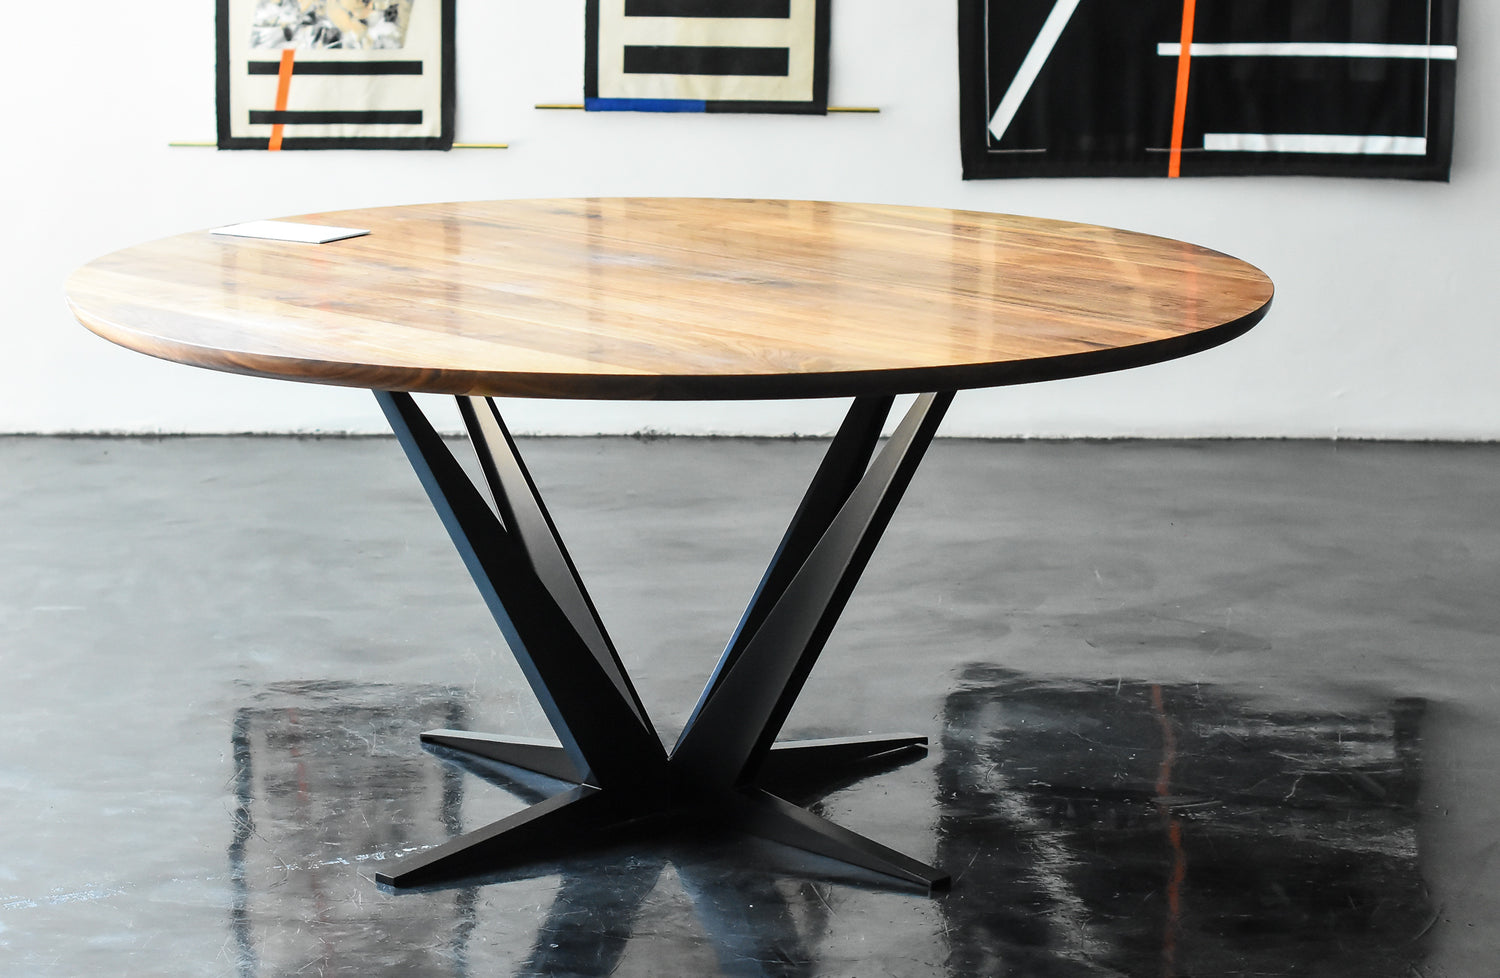 Agave Round Dining Table